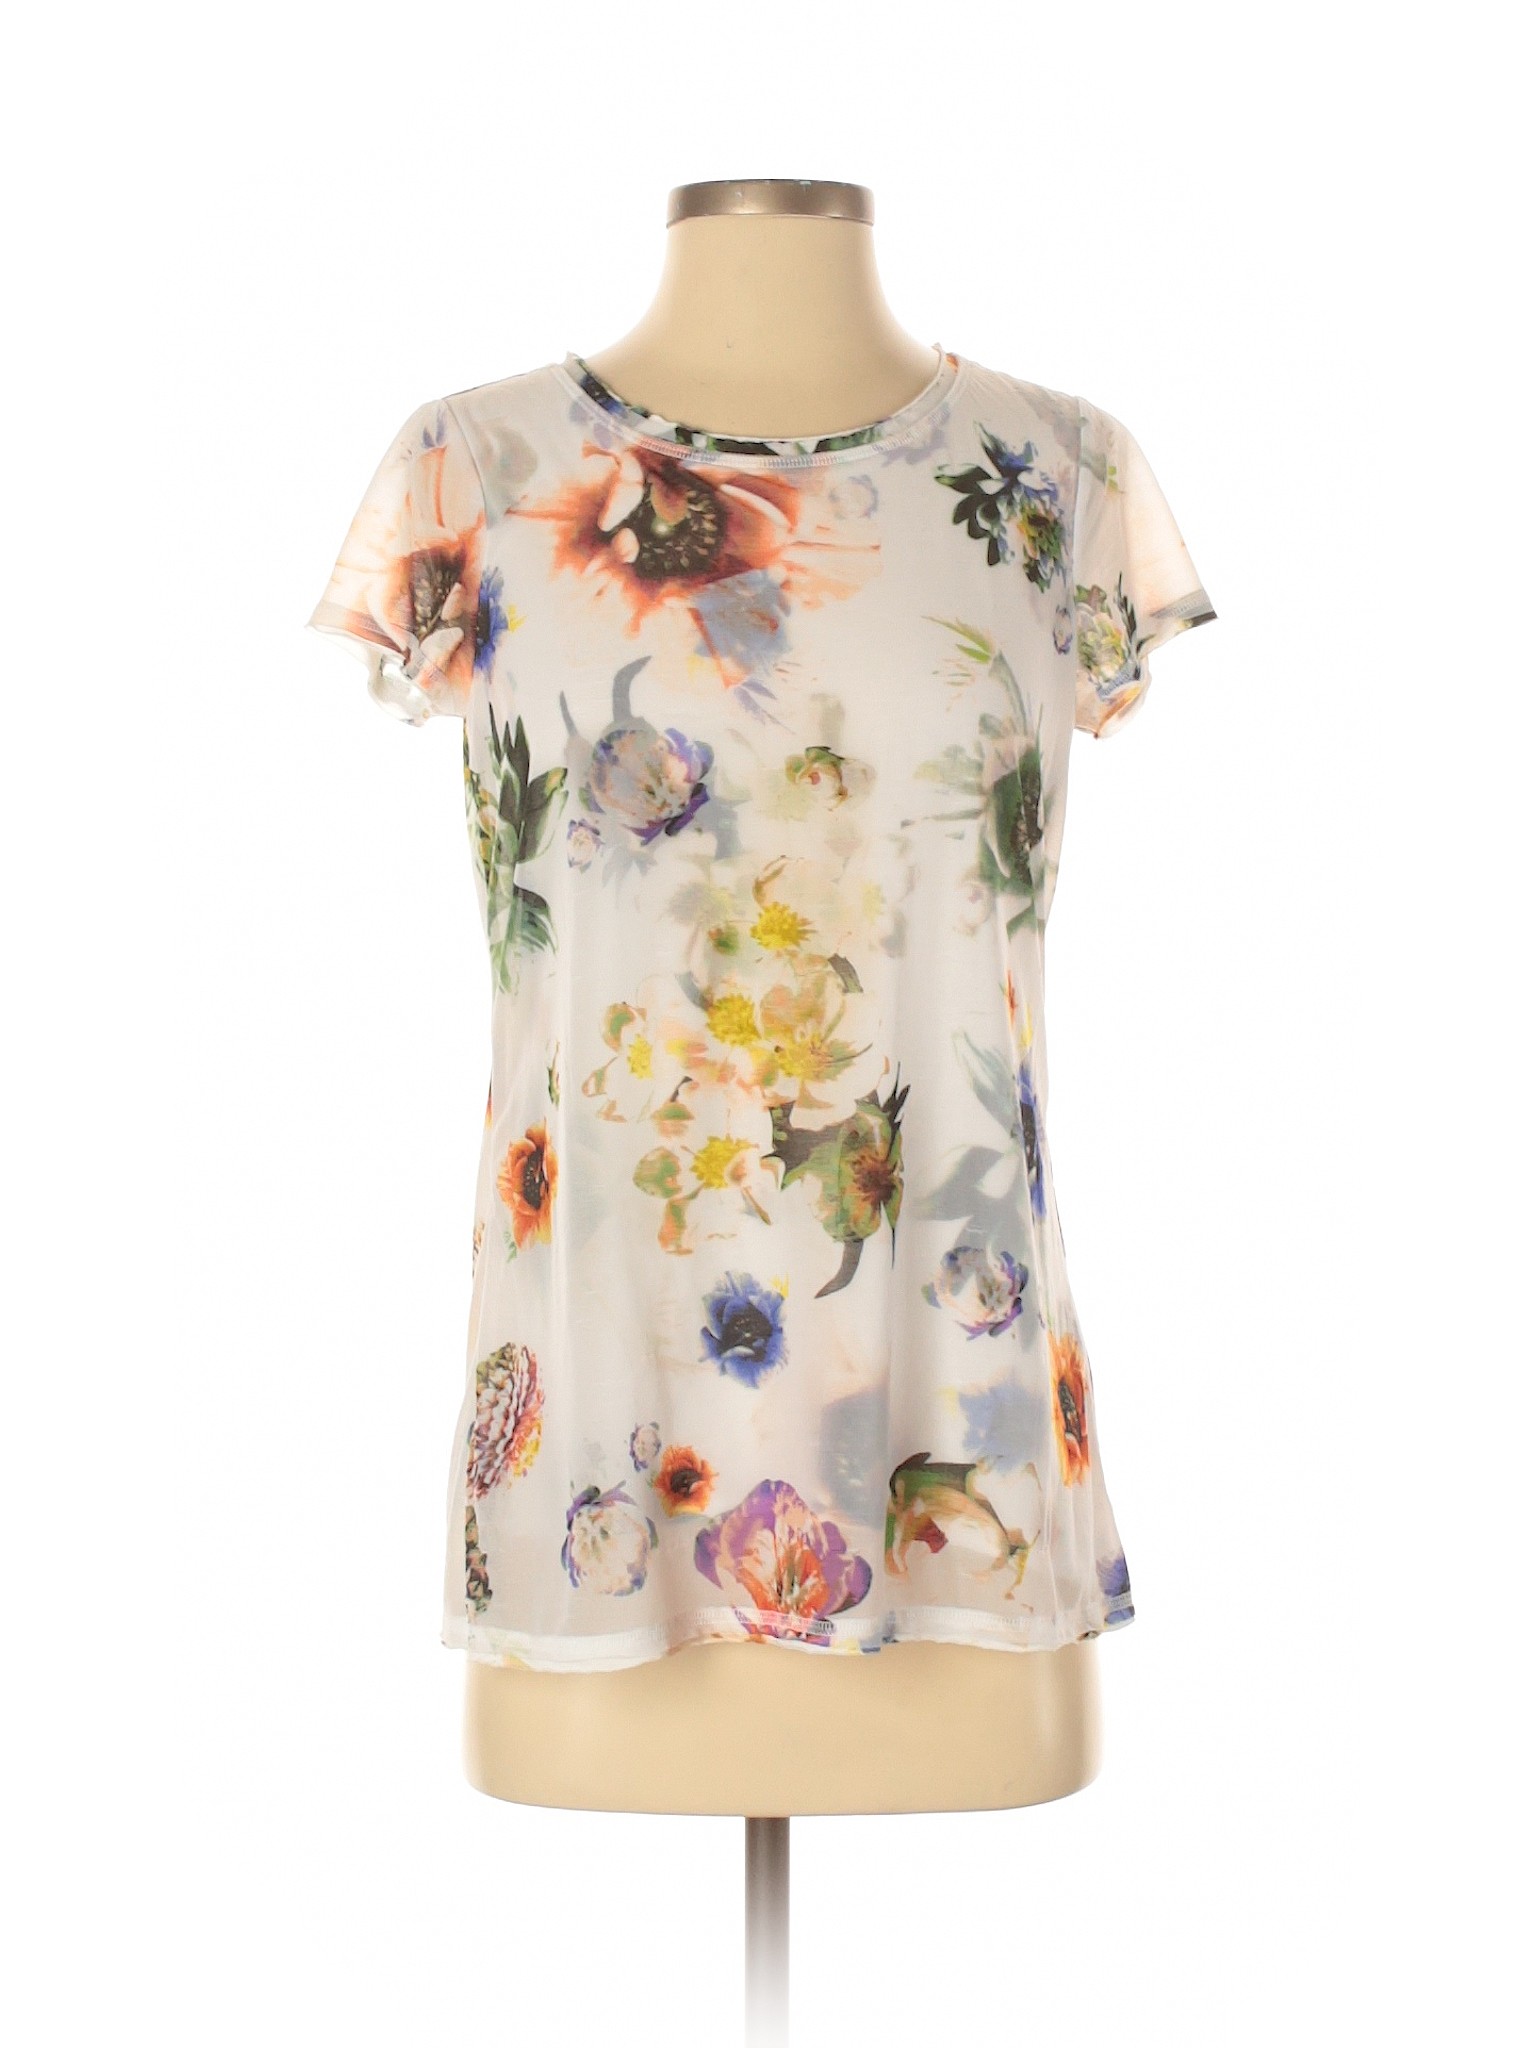 Simply Vera Vera Wang 100% Polyester Floral White Blue Short Sleeve ...